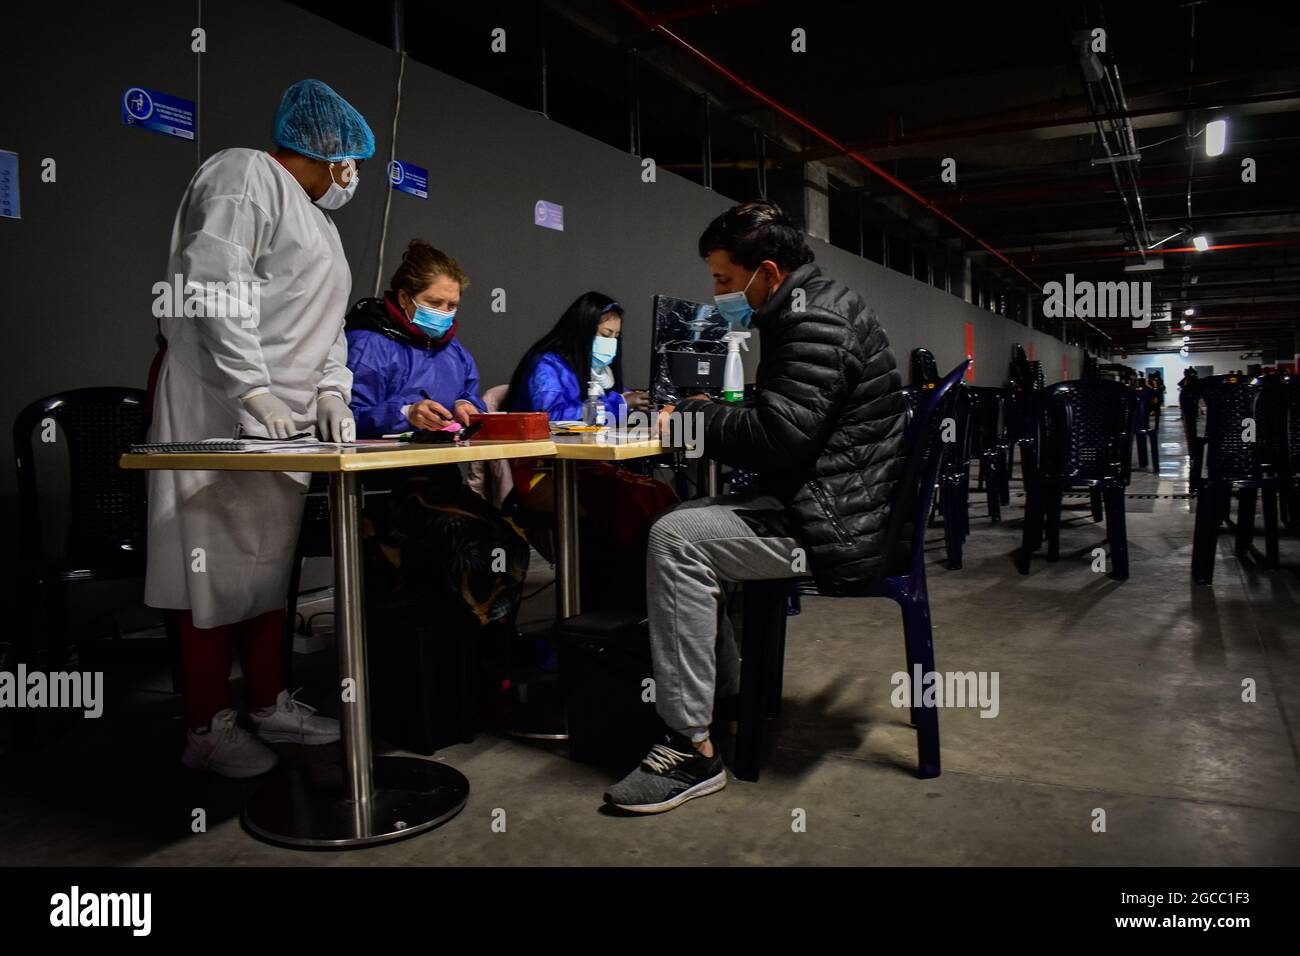 A men fills out the consents to get a dose of the Moderna COVID-19 as people from ages 25 to 30 start their vaccination phase with the Moderna novel COVID-19 vaccine against the Coronavirus disease in Ipiales - Nariño, Colombia on August 2, 2021. Stock Photo